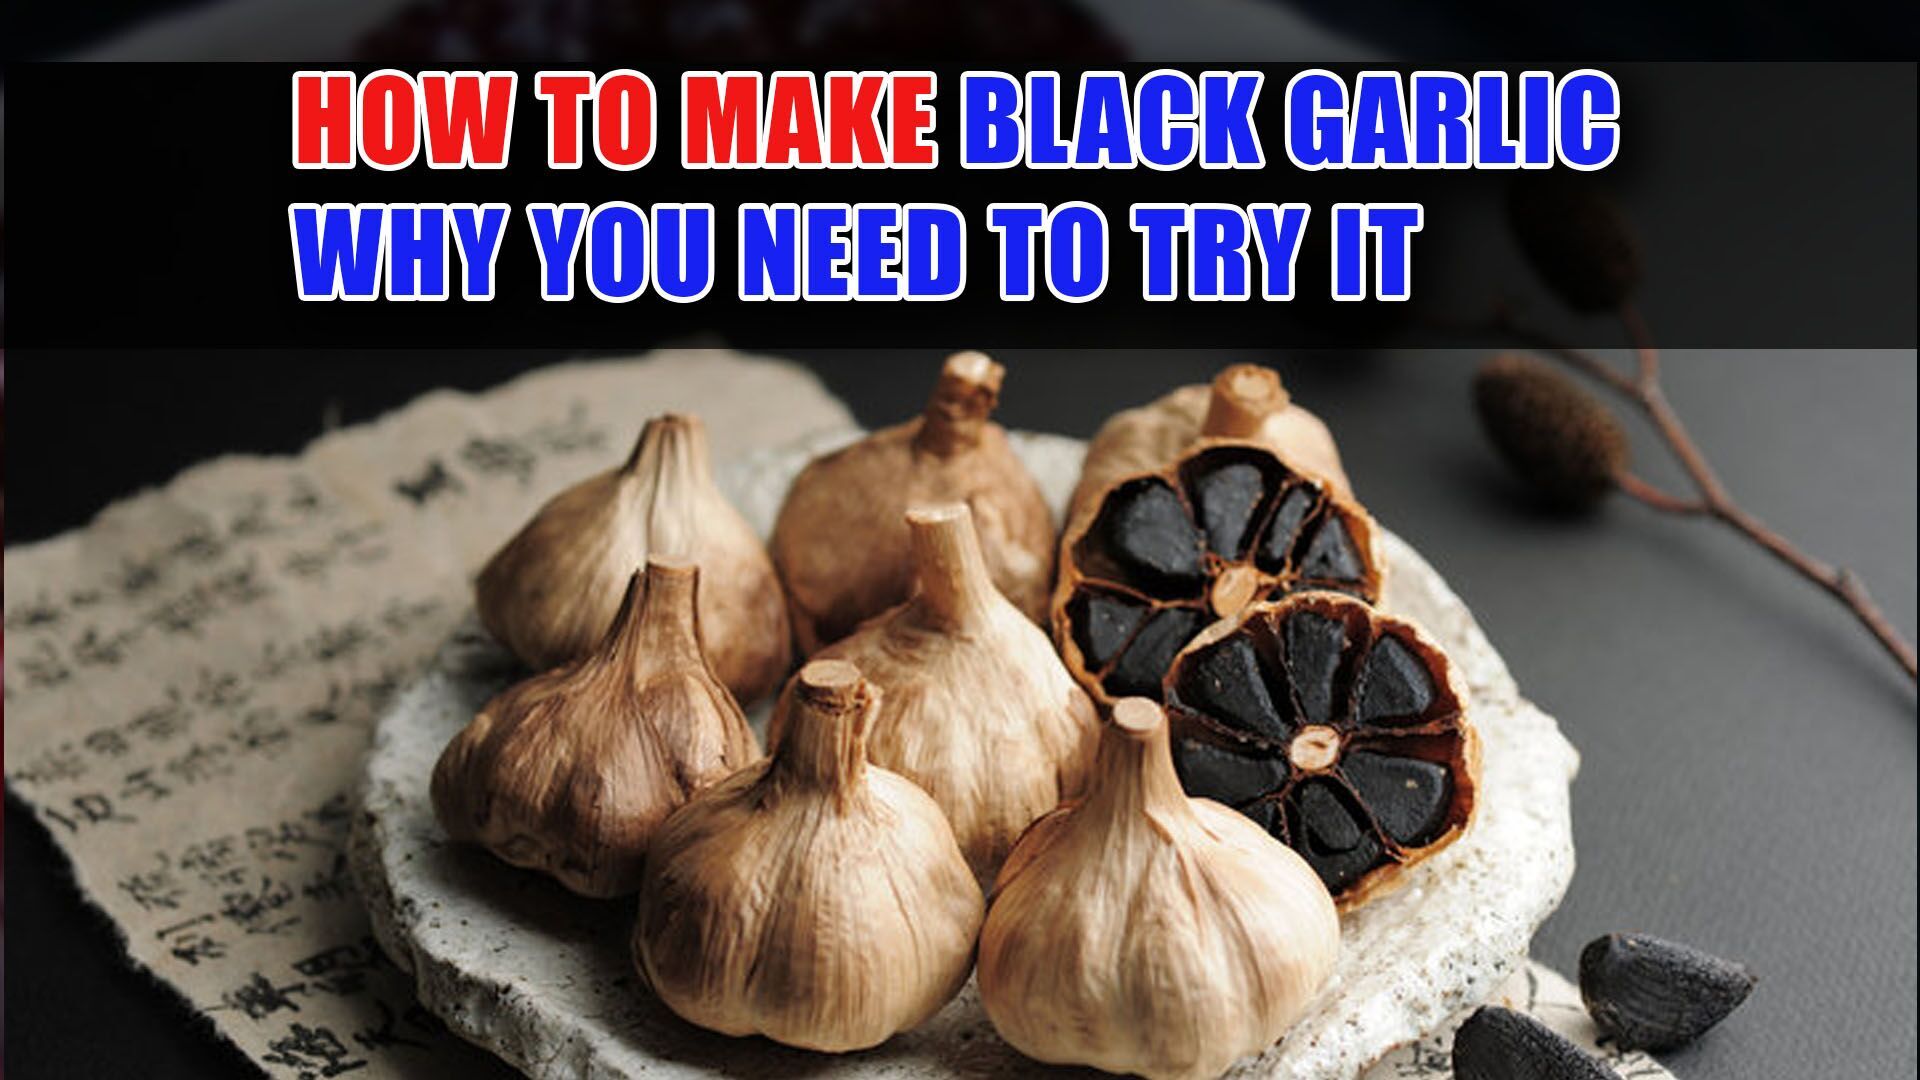 How to Make Black Garlic Why You Need to Try It